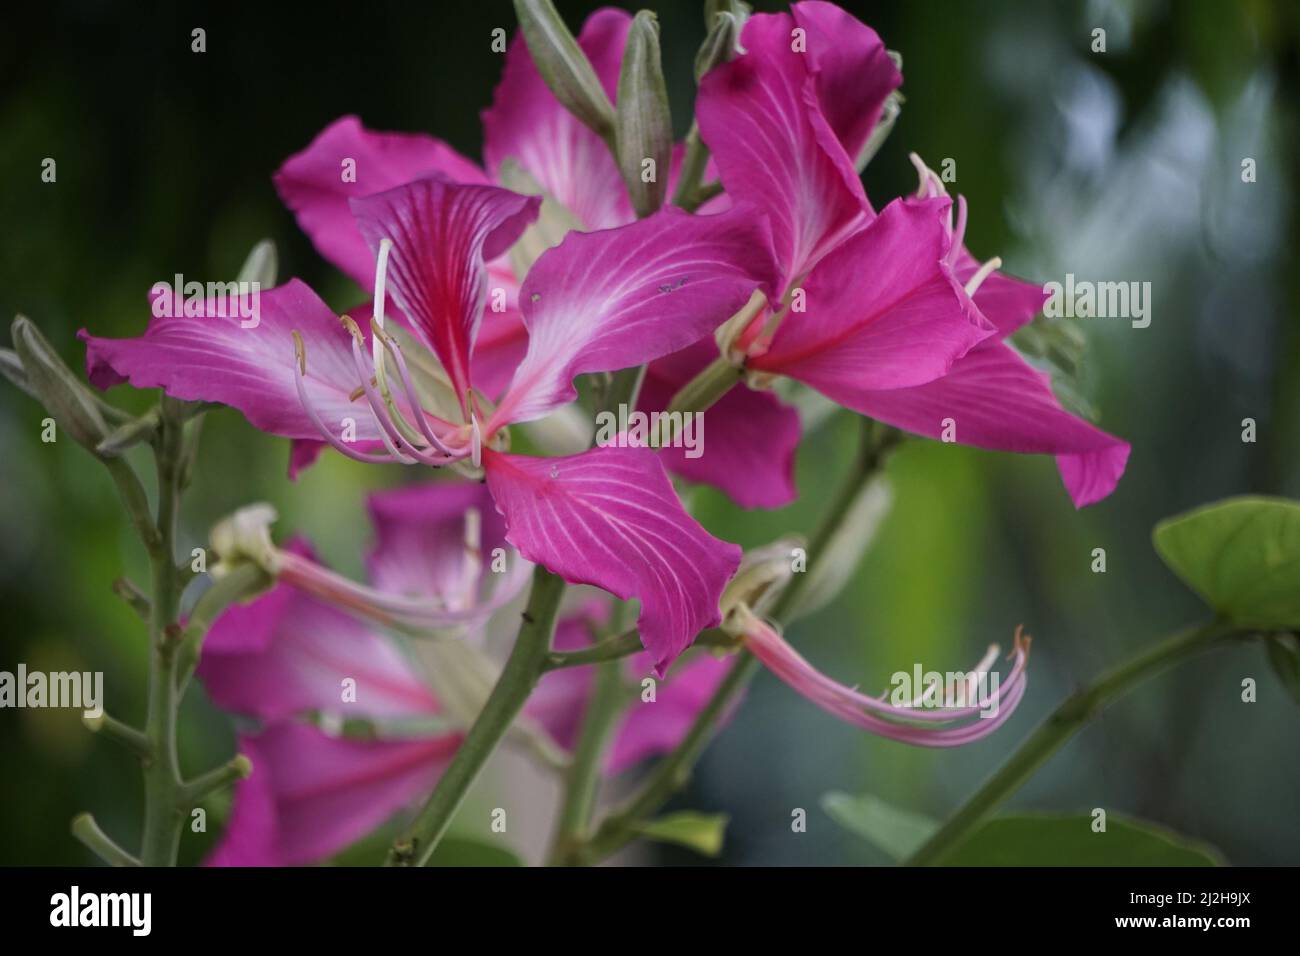 Bauhinia purpurea (Also called purple bauhinia, orchid tree, khairwal, karar) flower. In Indian traditional medicine, the leaves are used to treat cou Stock Photo